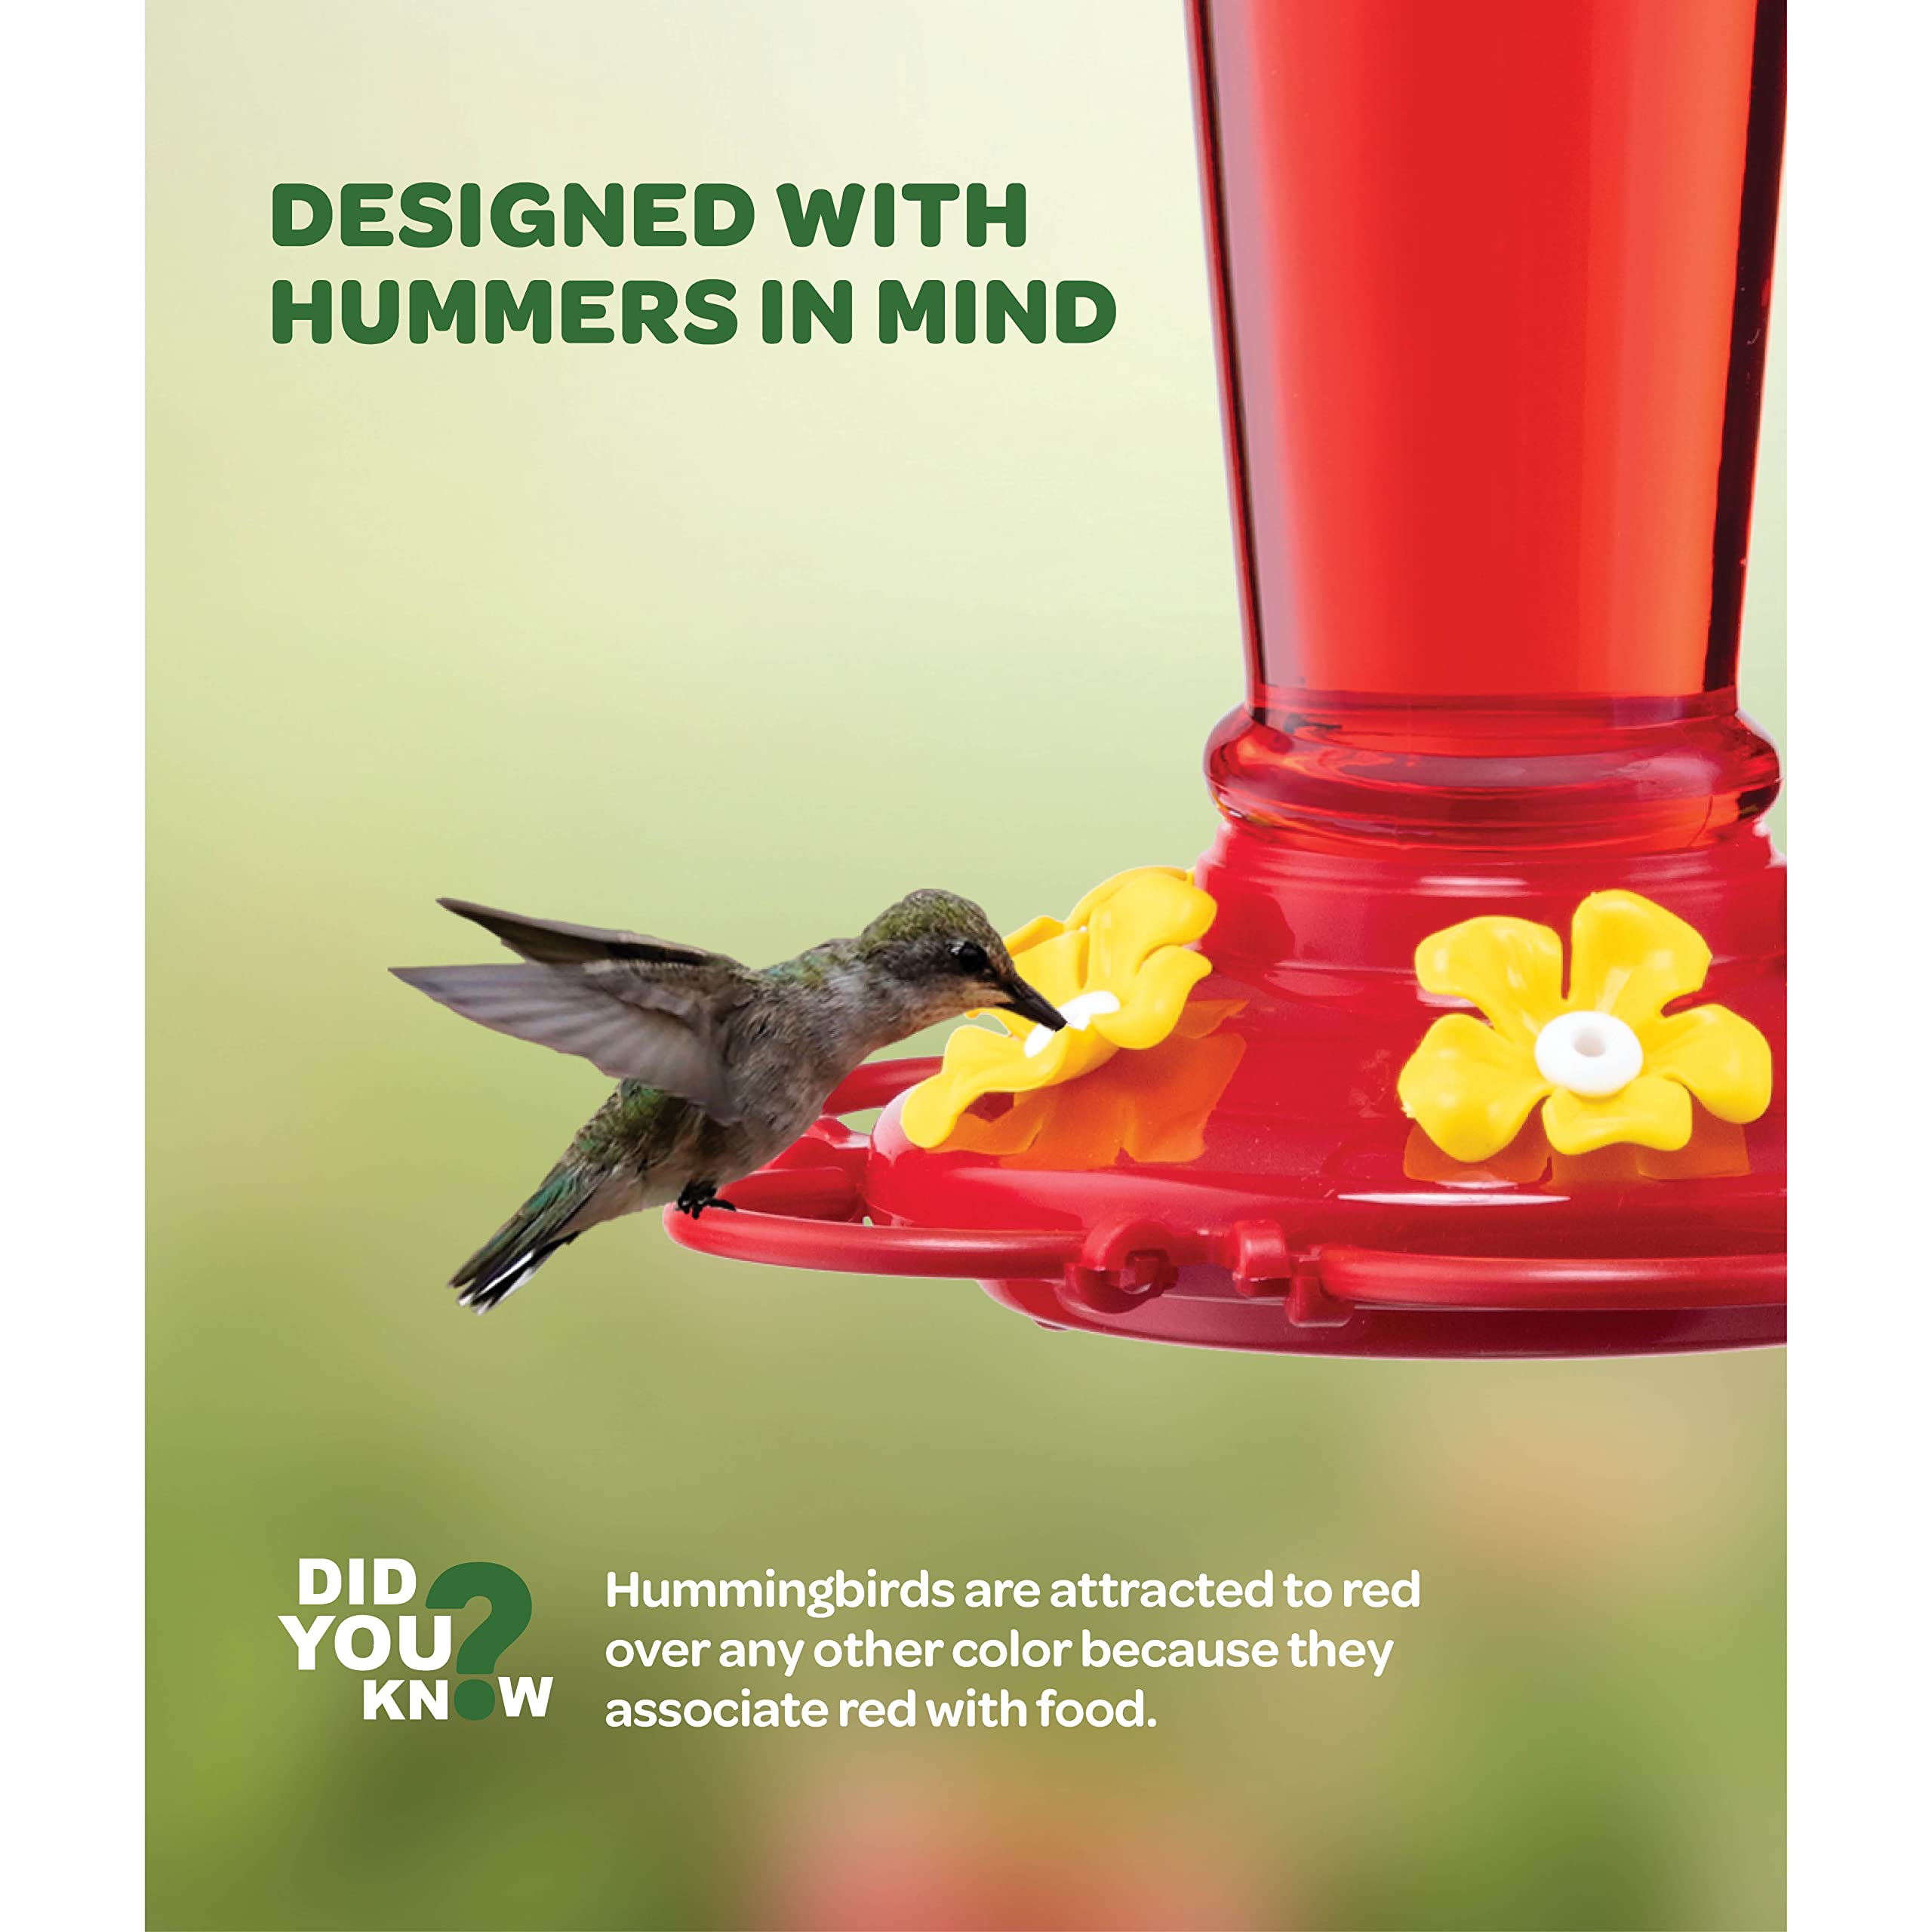 Hummingbird Feeder 10 oz. Glass Hummingbird Feeders for Outdoors, with Built-in Ant Guard - Circular Perch with 5 Feeding Ports - Wide Mouth for Easy Filling/2 Part Base for Easy Cleaning  - Like New